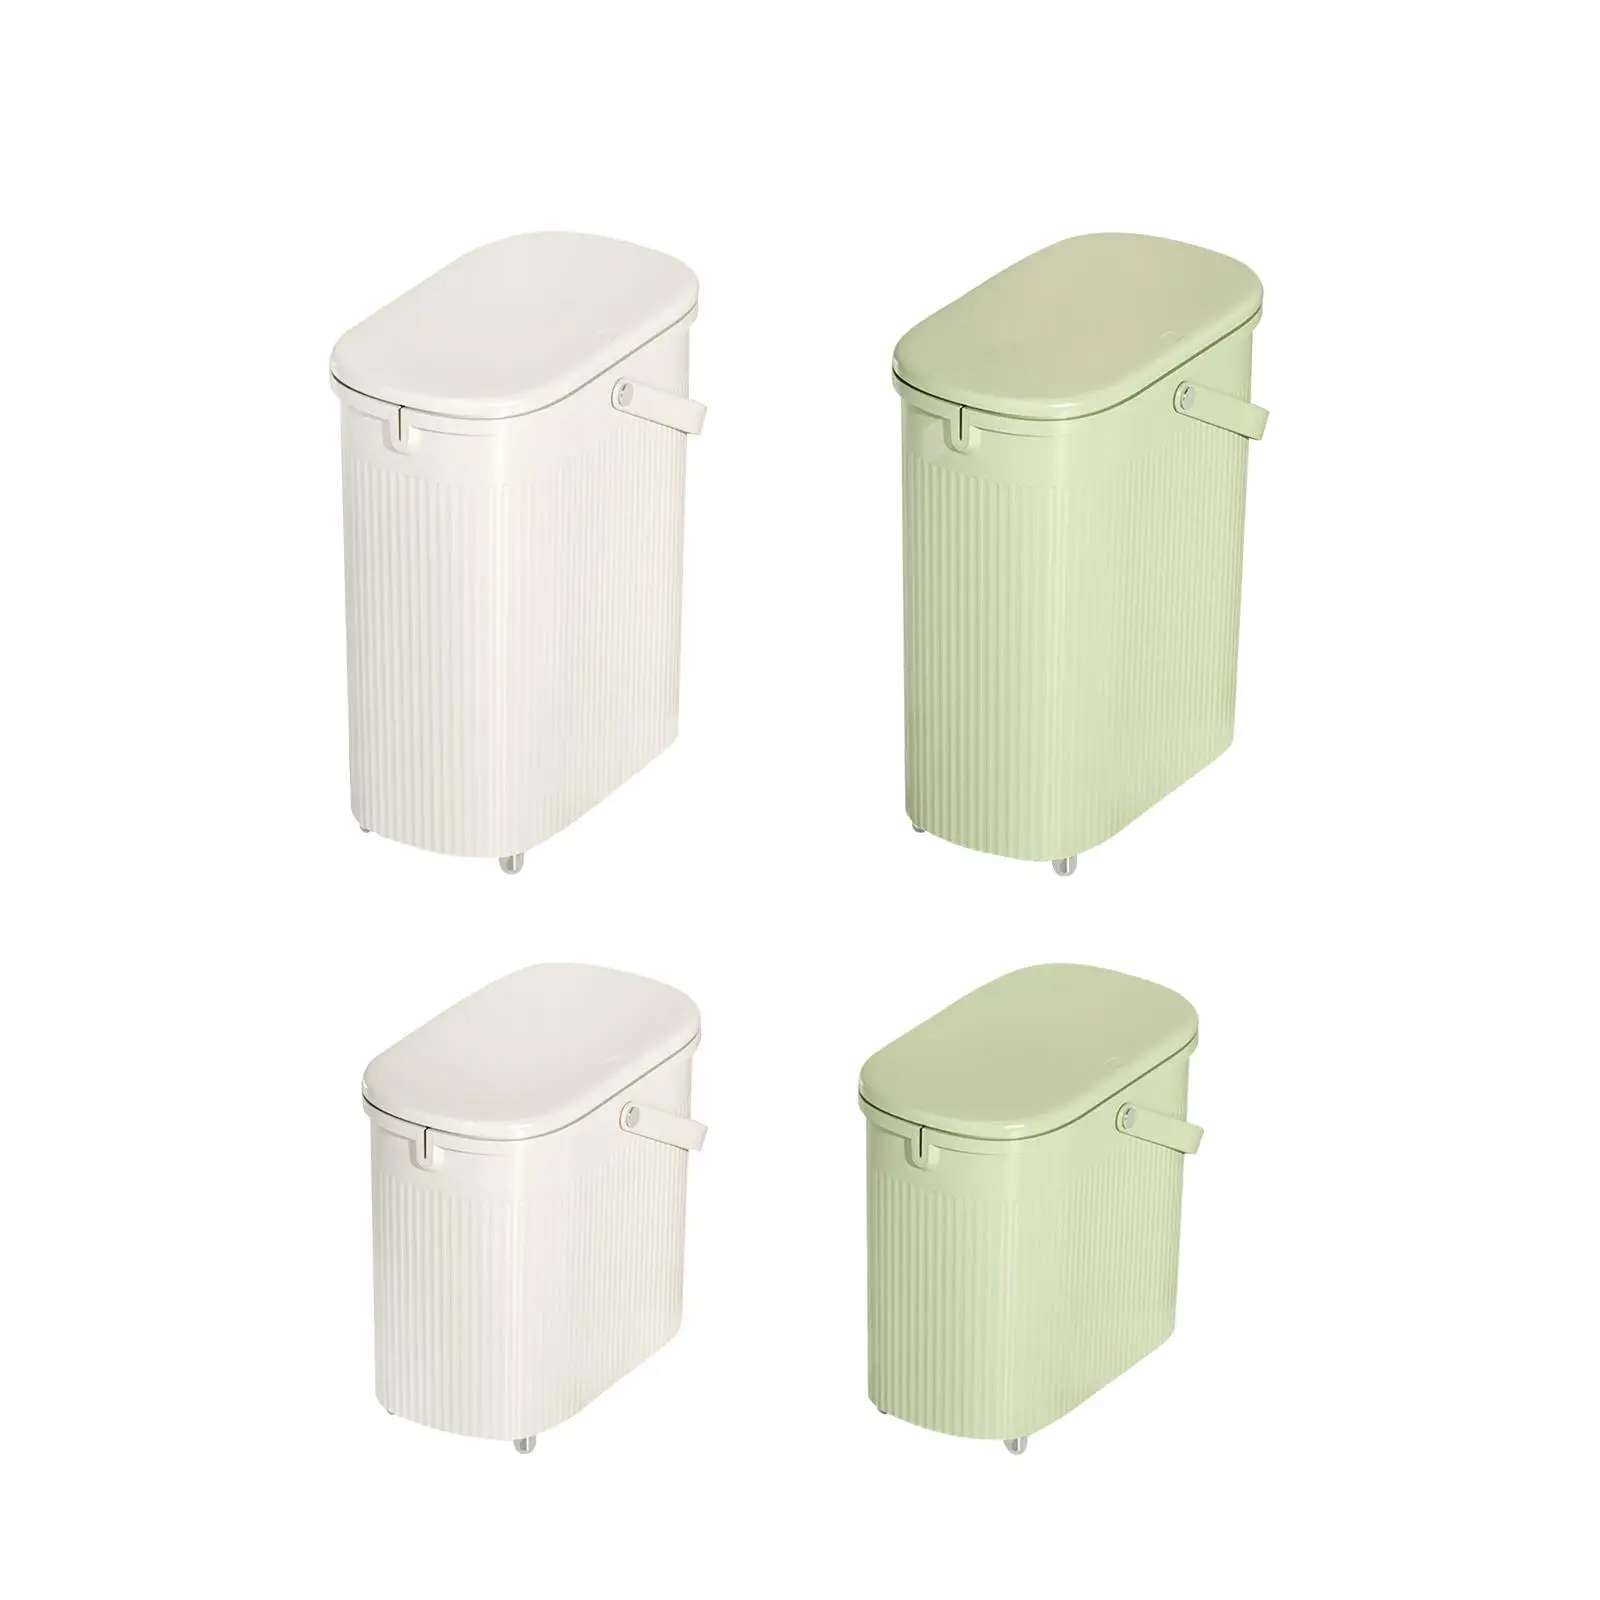 Wastebasket with Lid Stylish Design Rectangular Trash Can Narrow Garbage Can for Laundry Room Kitchen Entryway Study Office